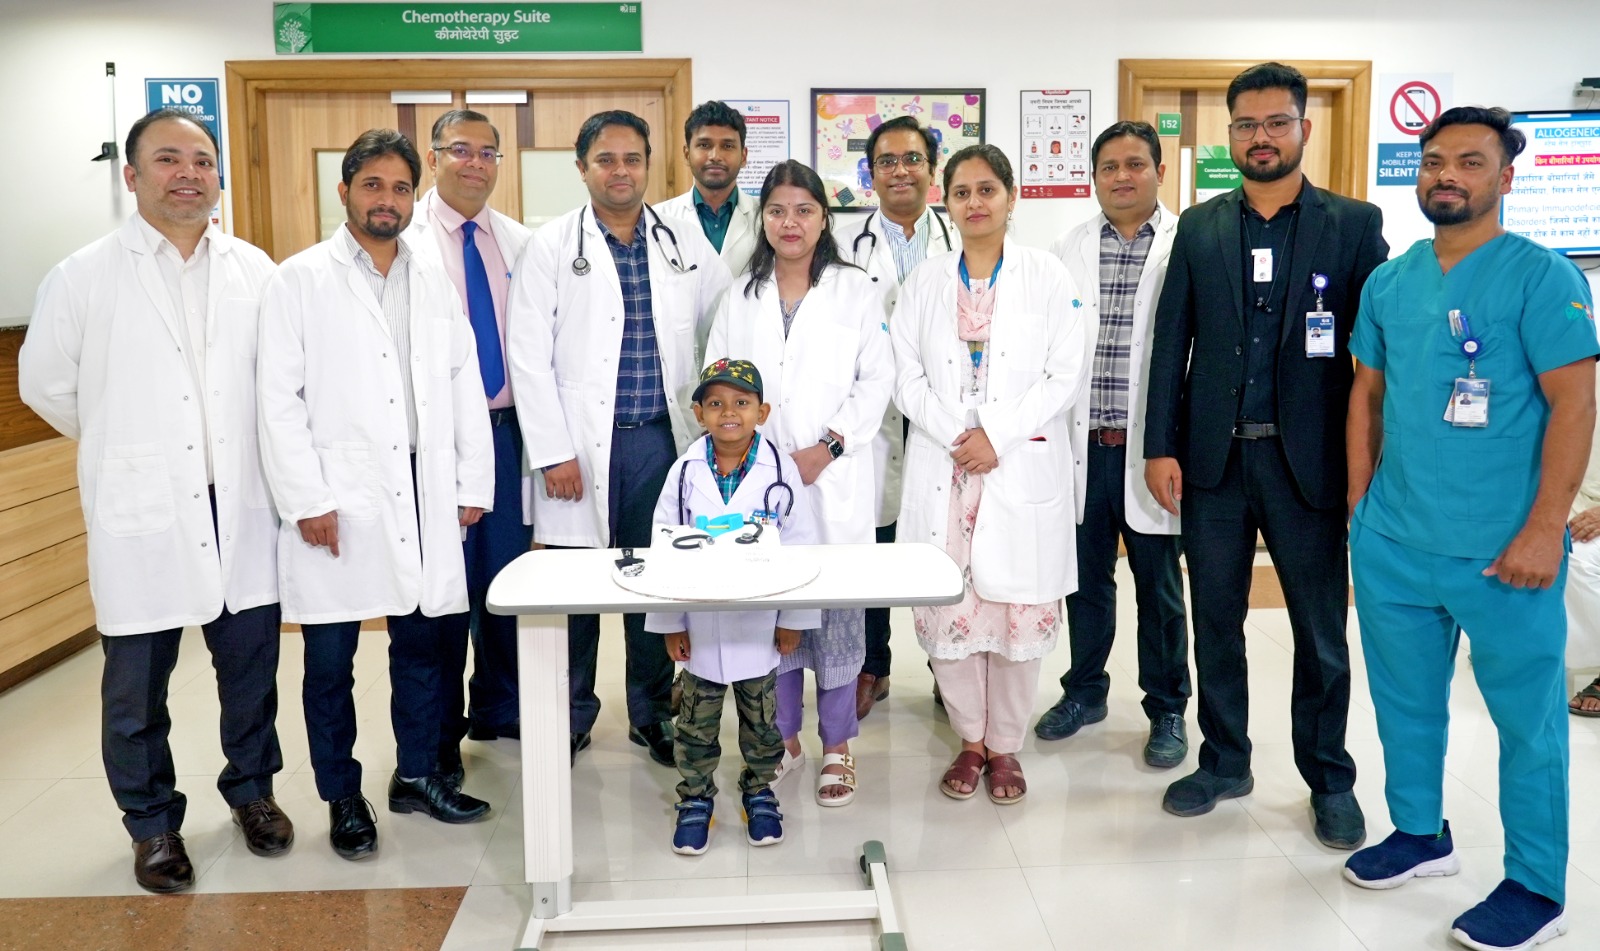 Apollomedics fulfills cancer-stricken 5-year-old Vedant's dream of becoming a doctor